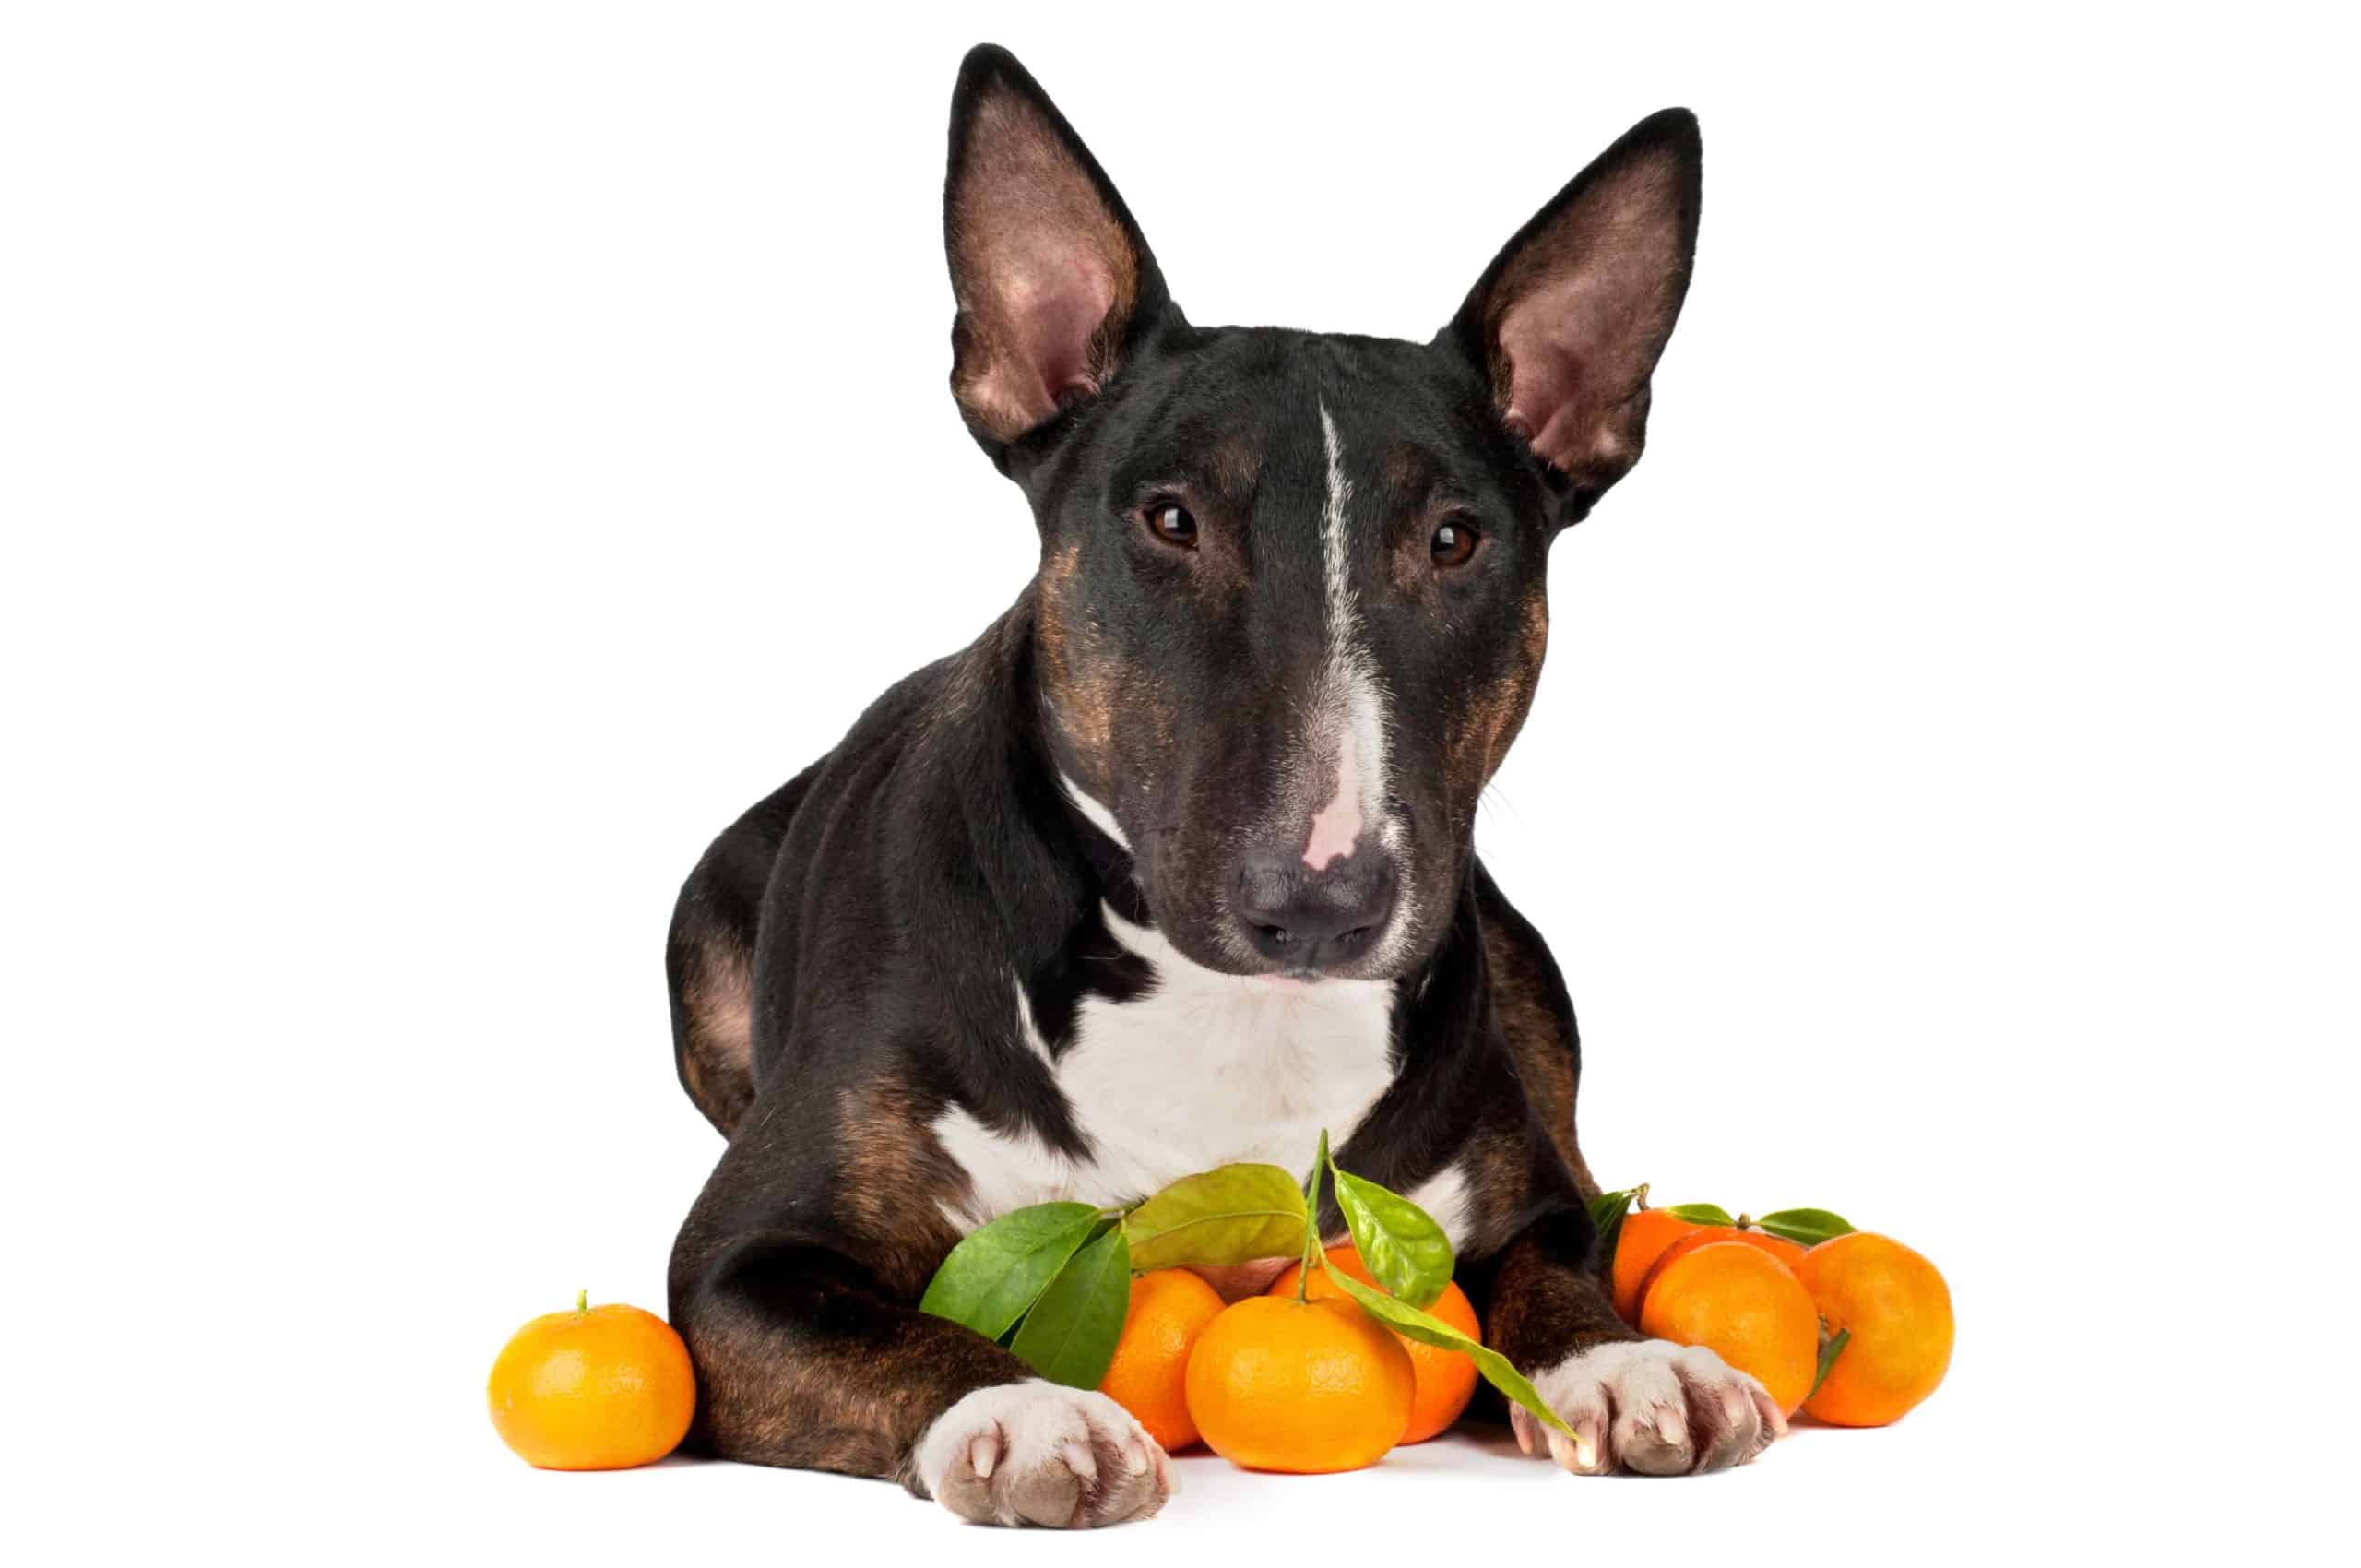 Dog with tangerines on white background Dogs can eat oranges and other citrus fruits like tangerines in moderation.